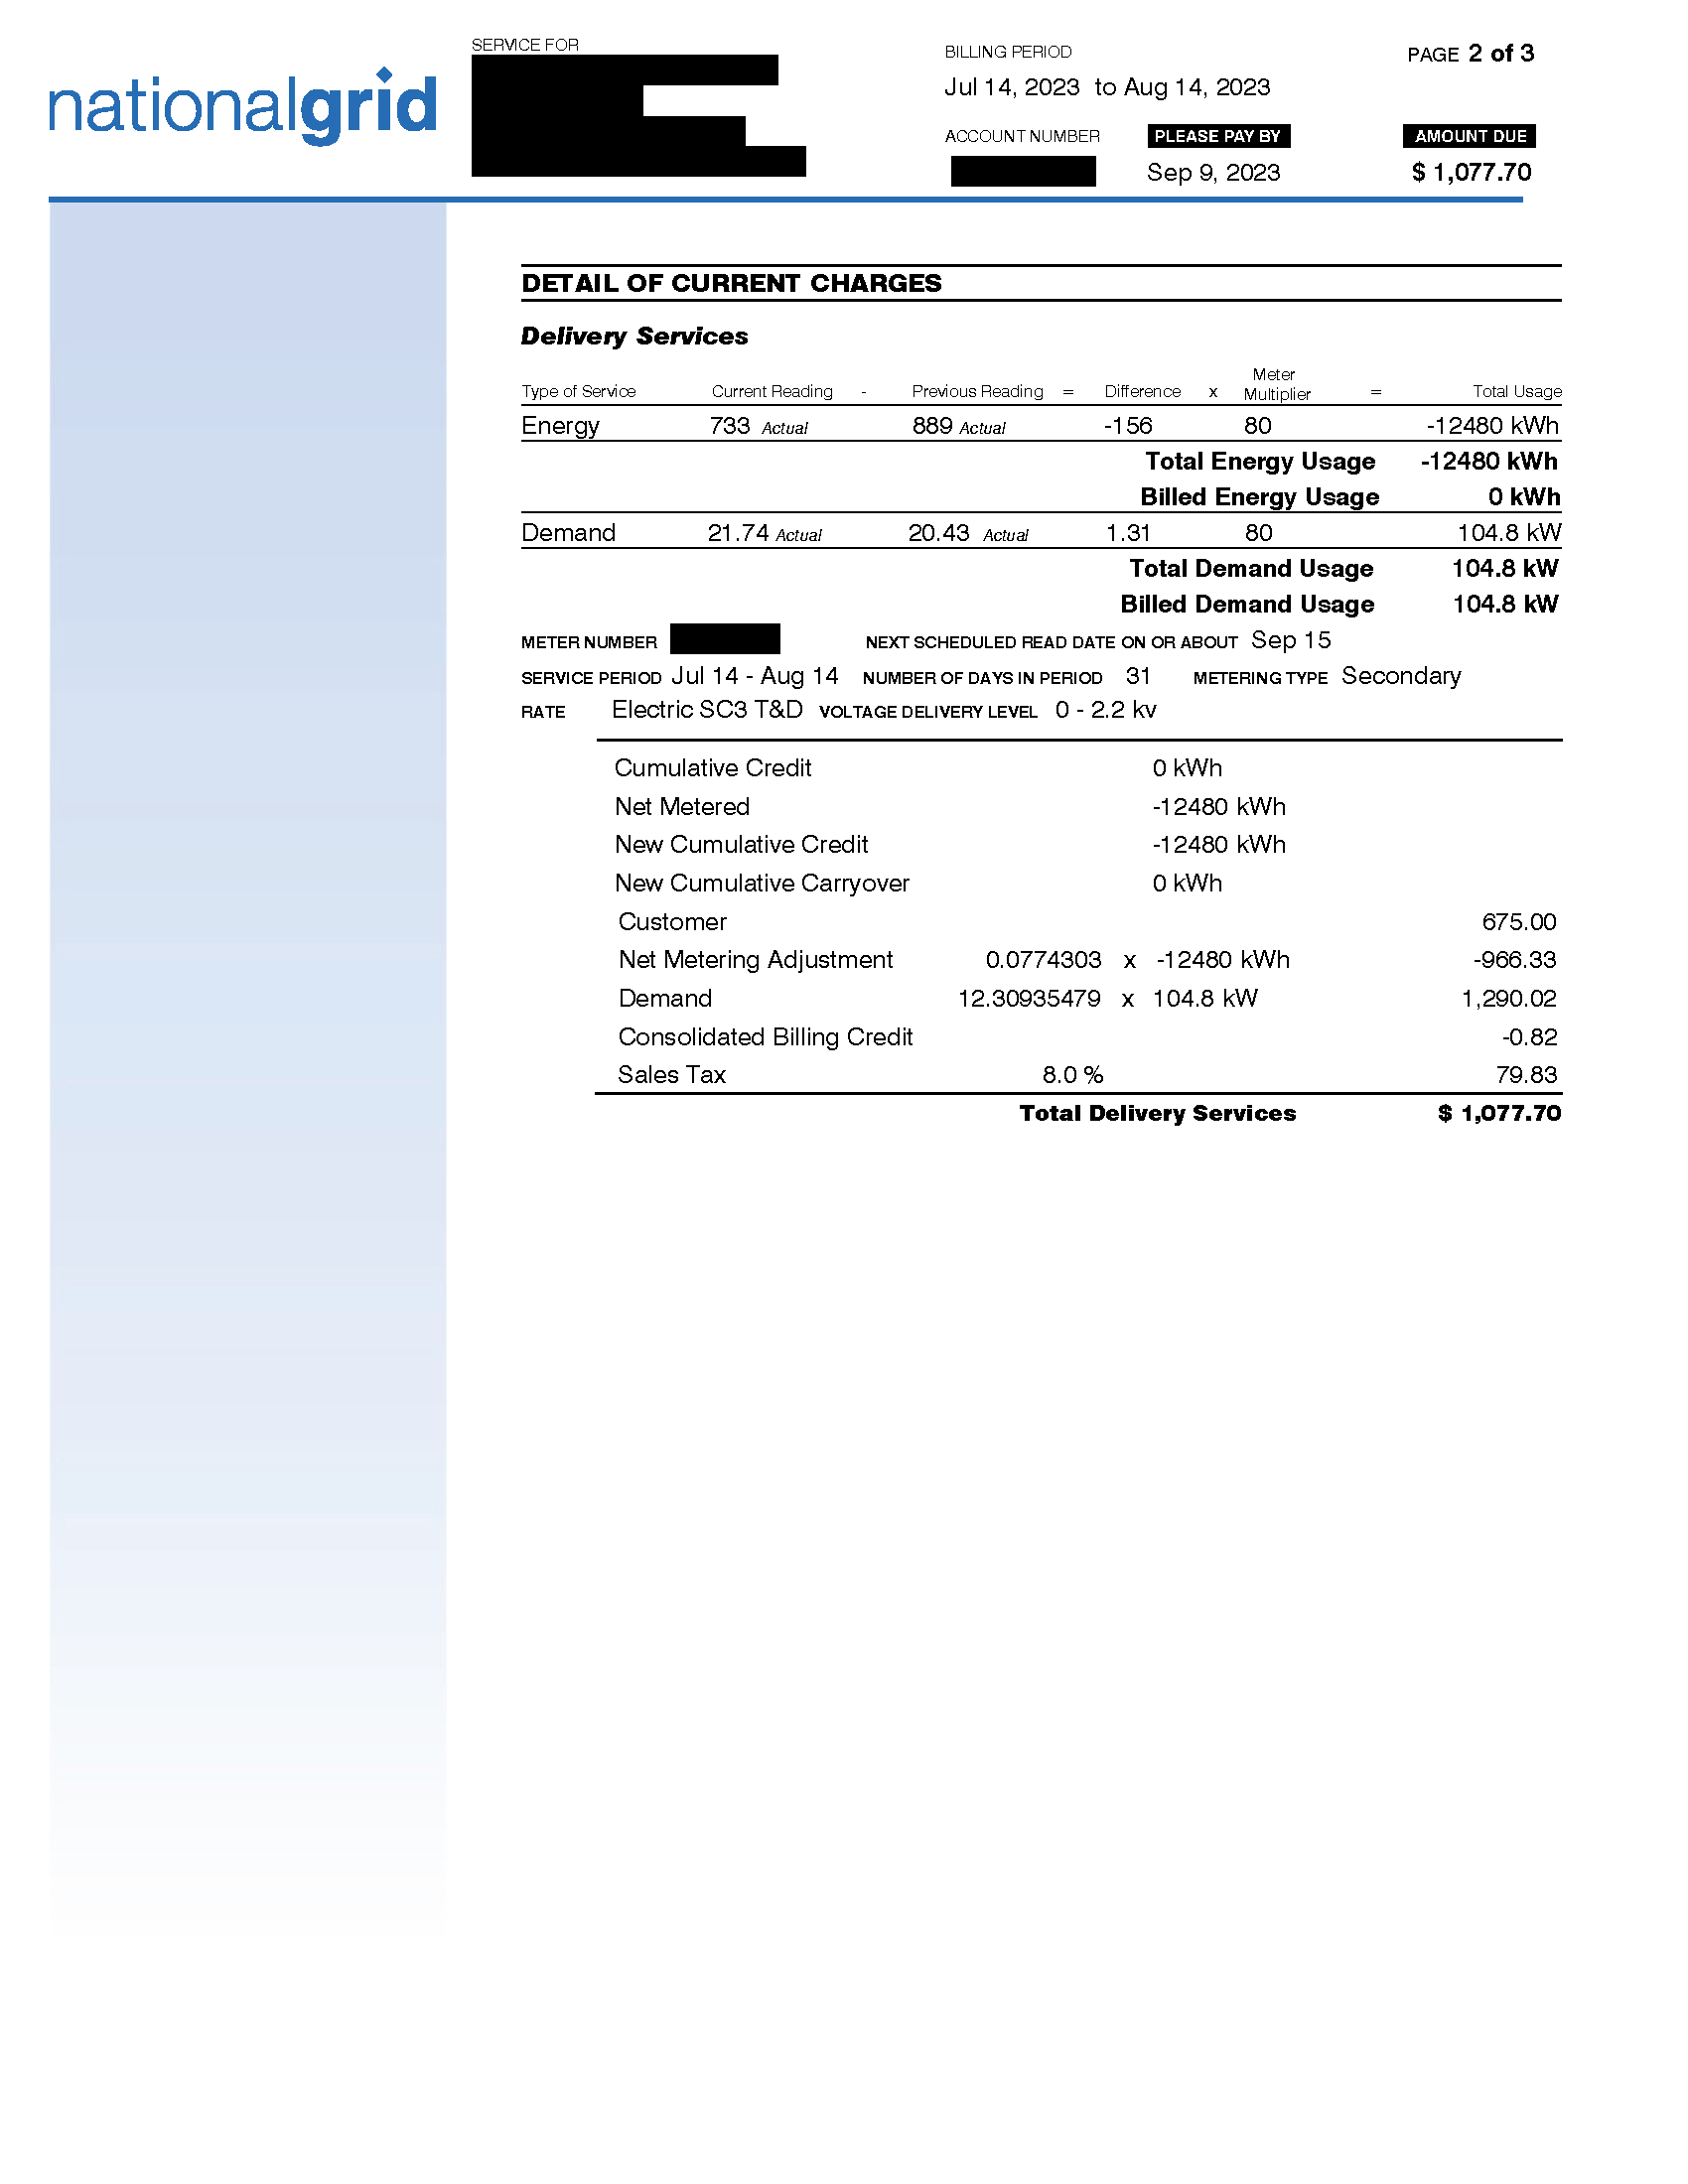 Rooftop Solar Bill - Page 2